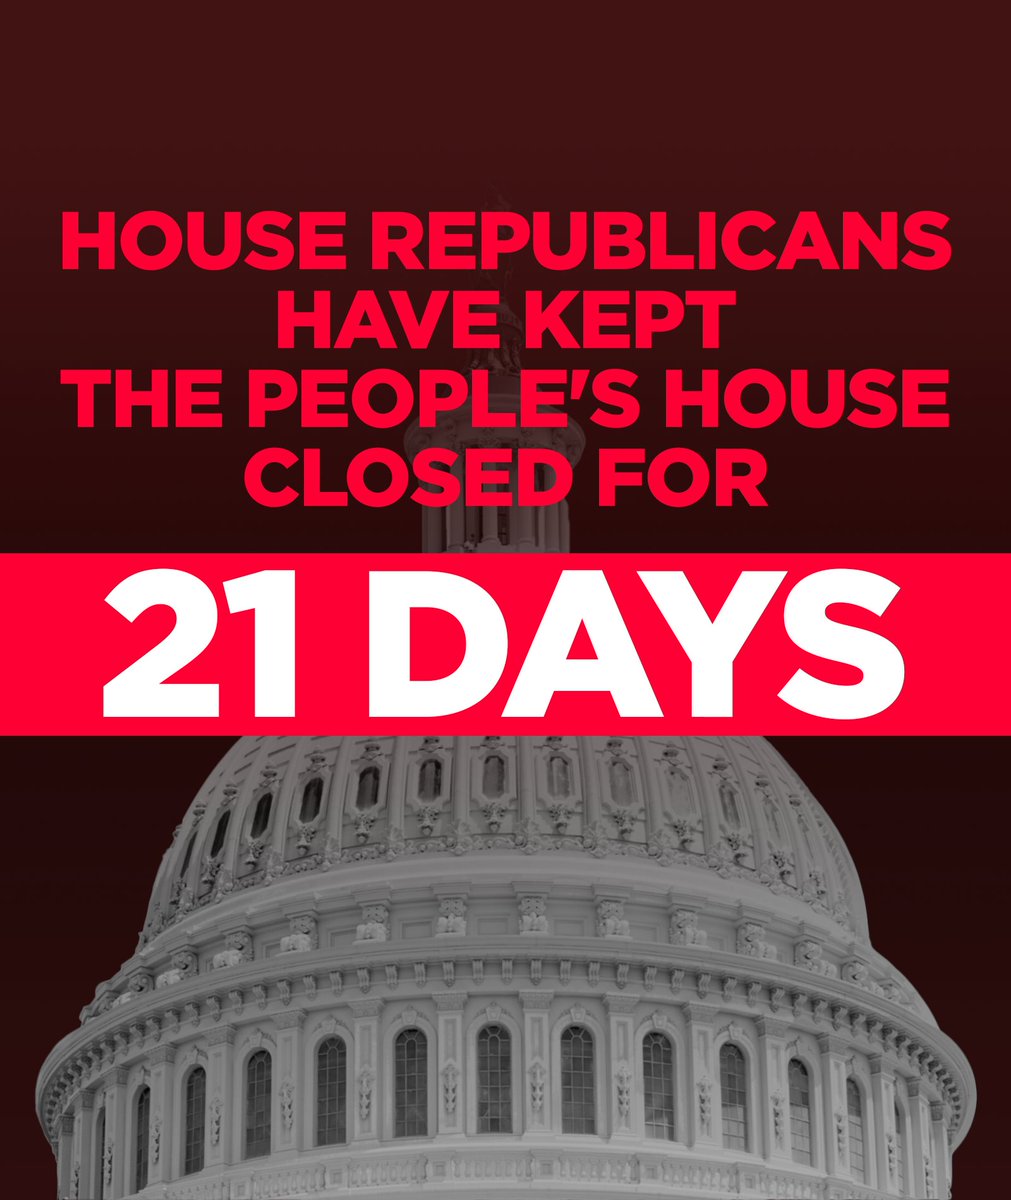 House Republicans have paralyzed the House with their division and dysfunction for the past 21 days. This gridlock has real consequences for our national security. It’s time for Republicans to abandon MAGA extremism and join us on a bipartisan path forward.